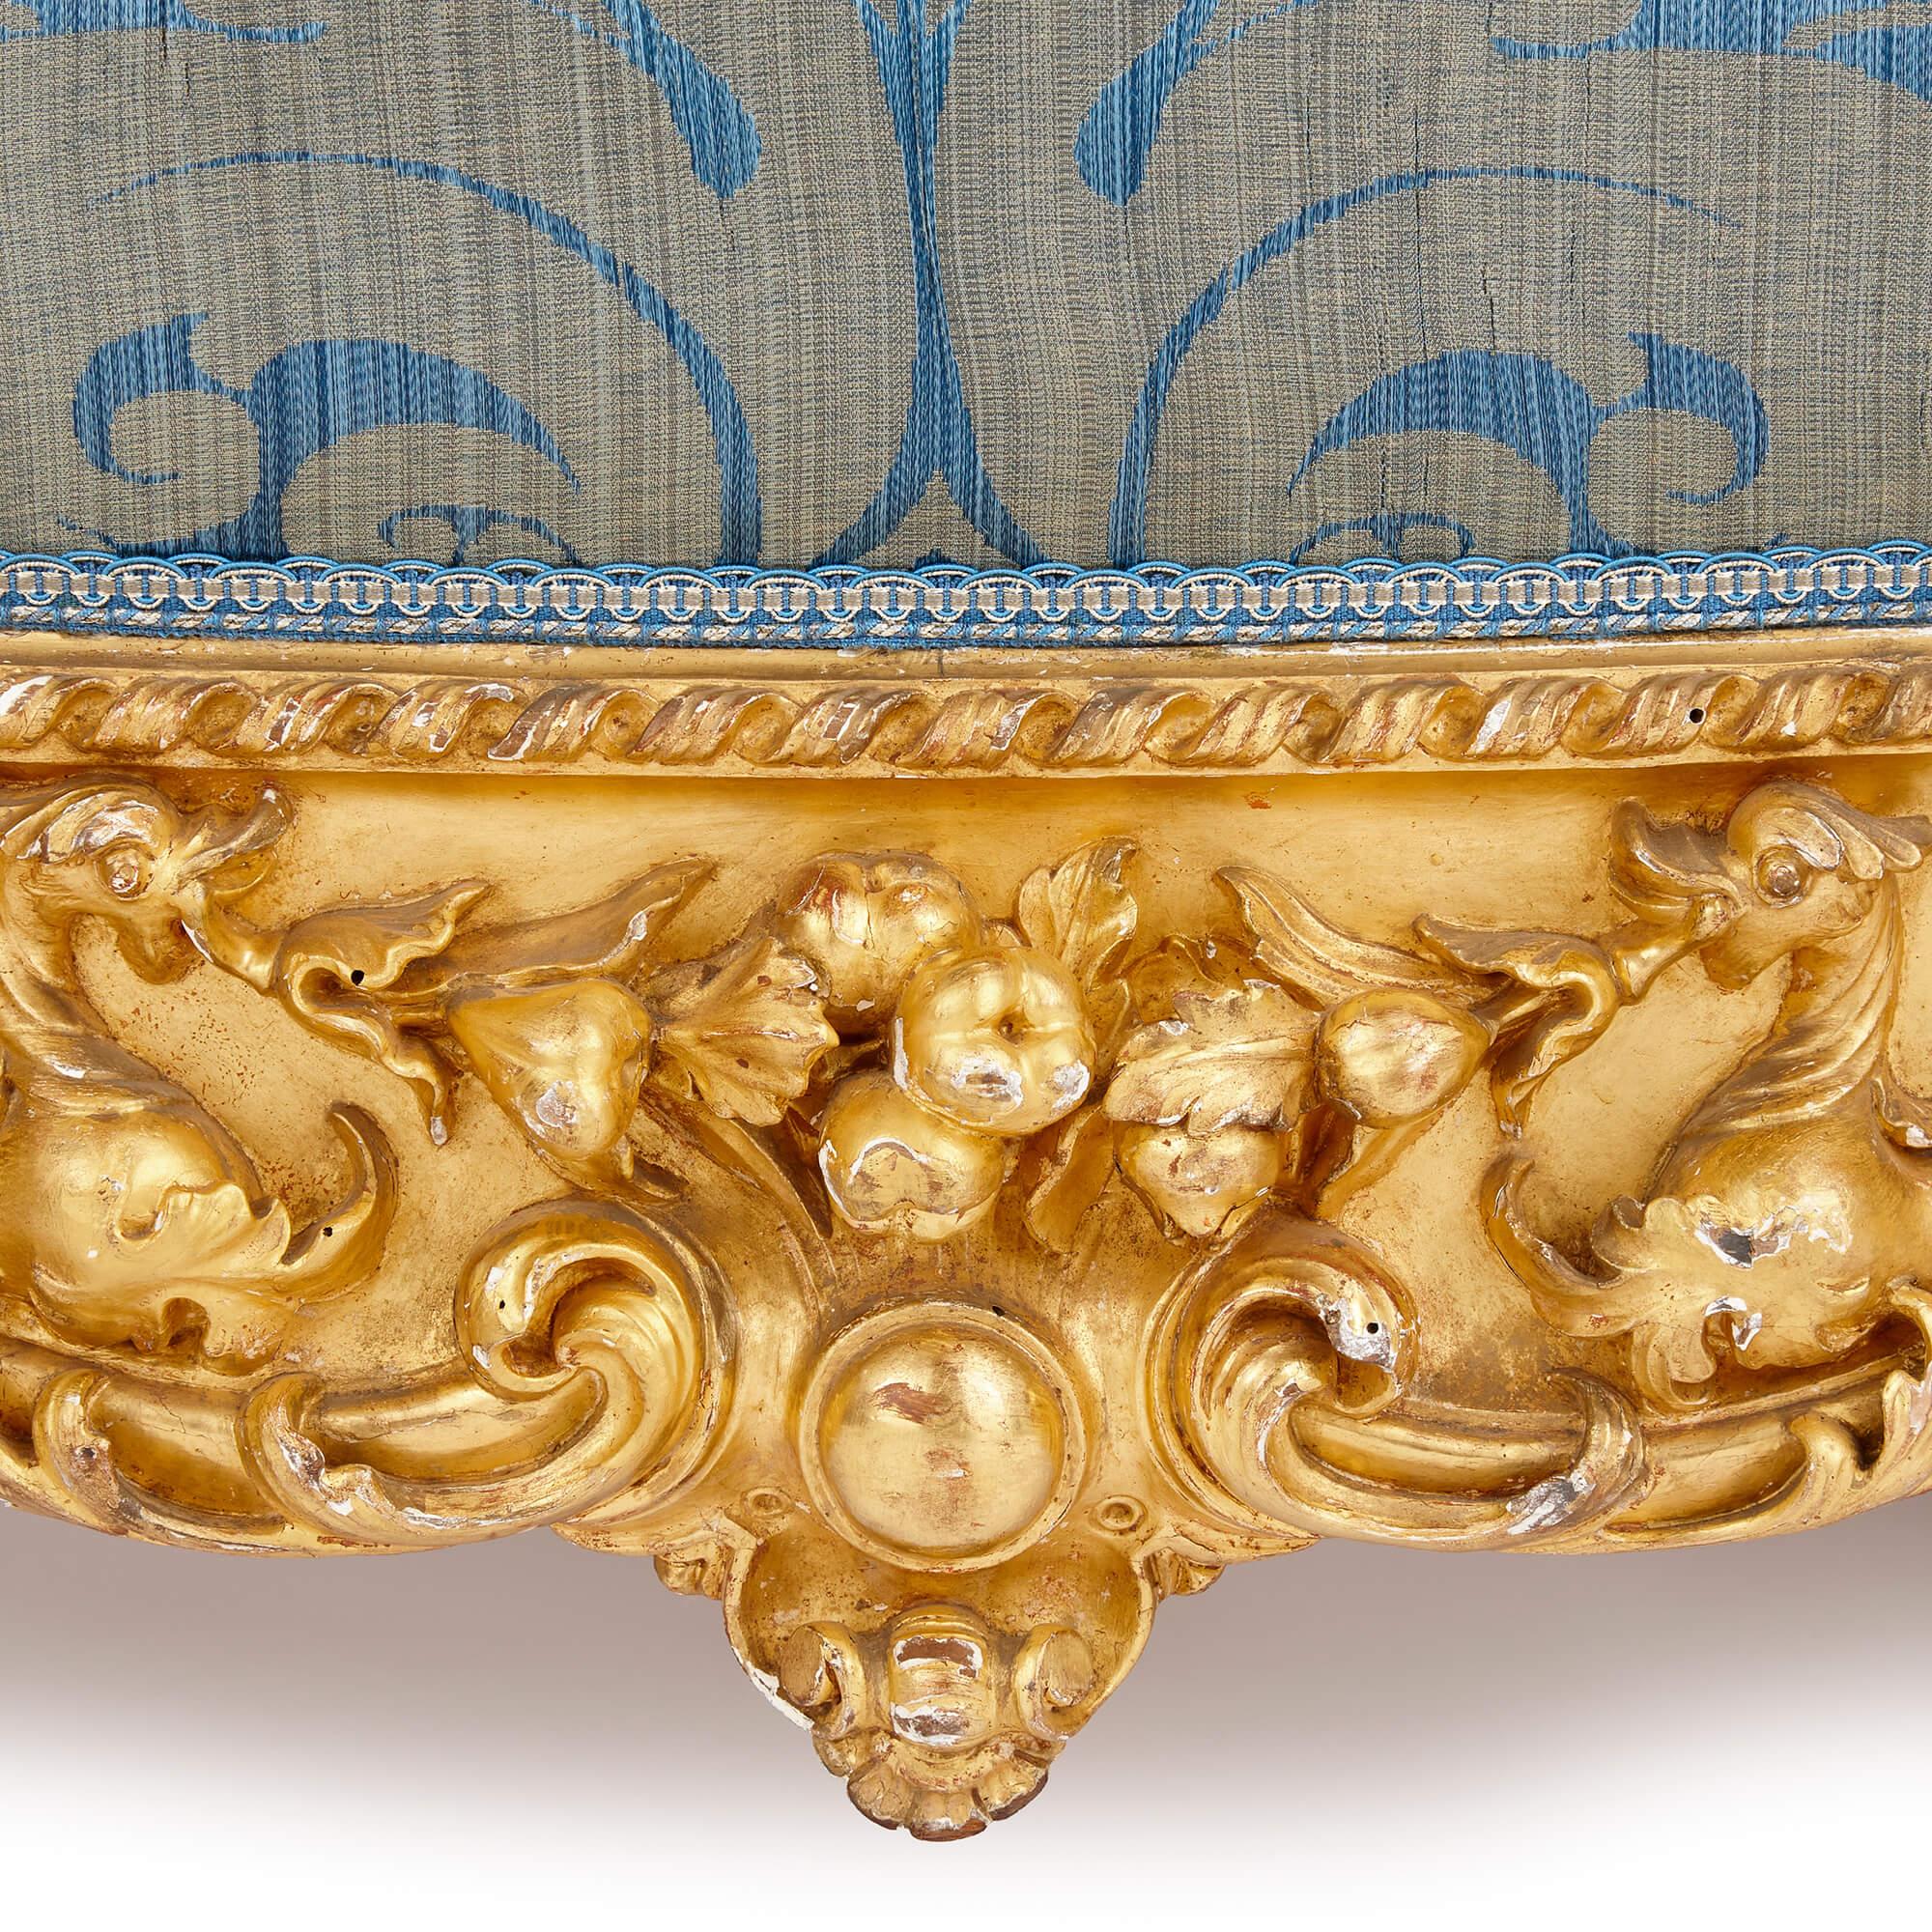 Large French Rococo Revival Style Giltwood Sofa For Sale 1